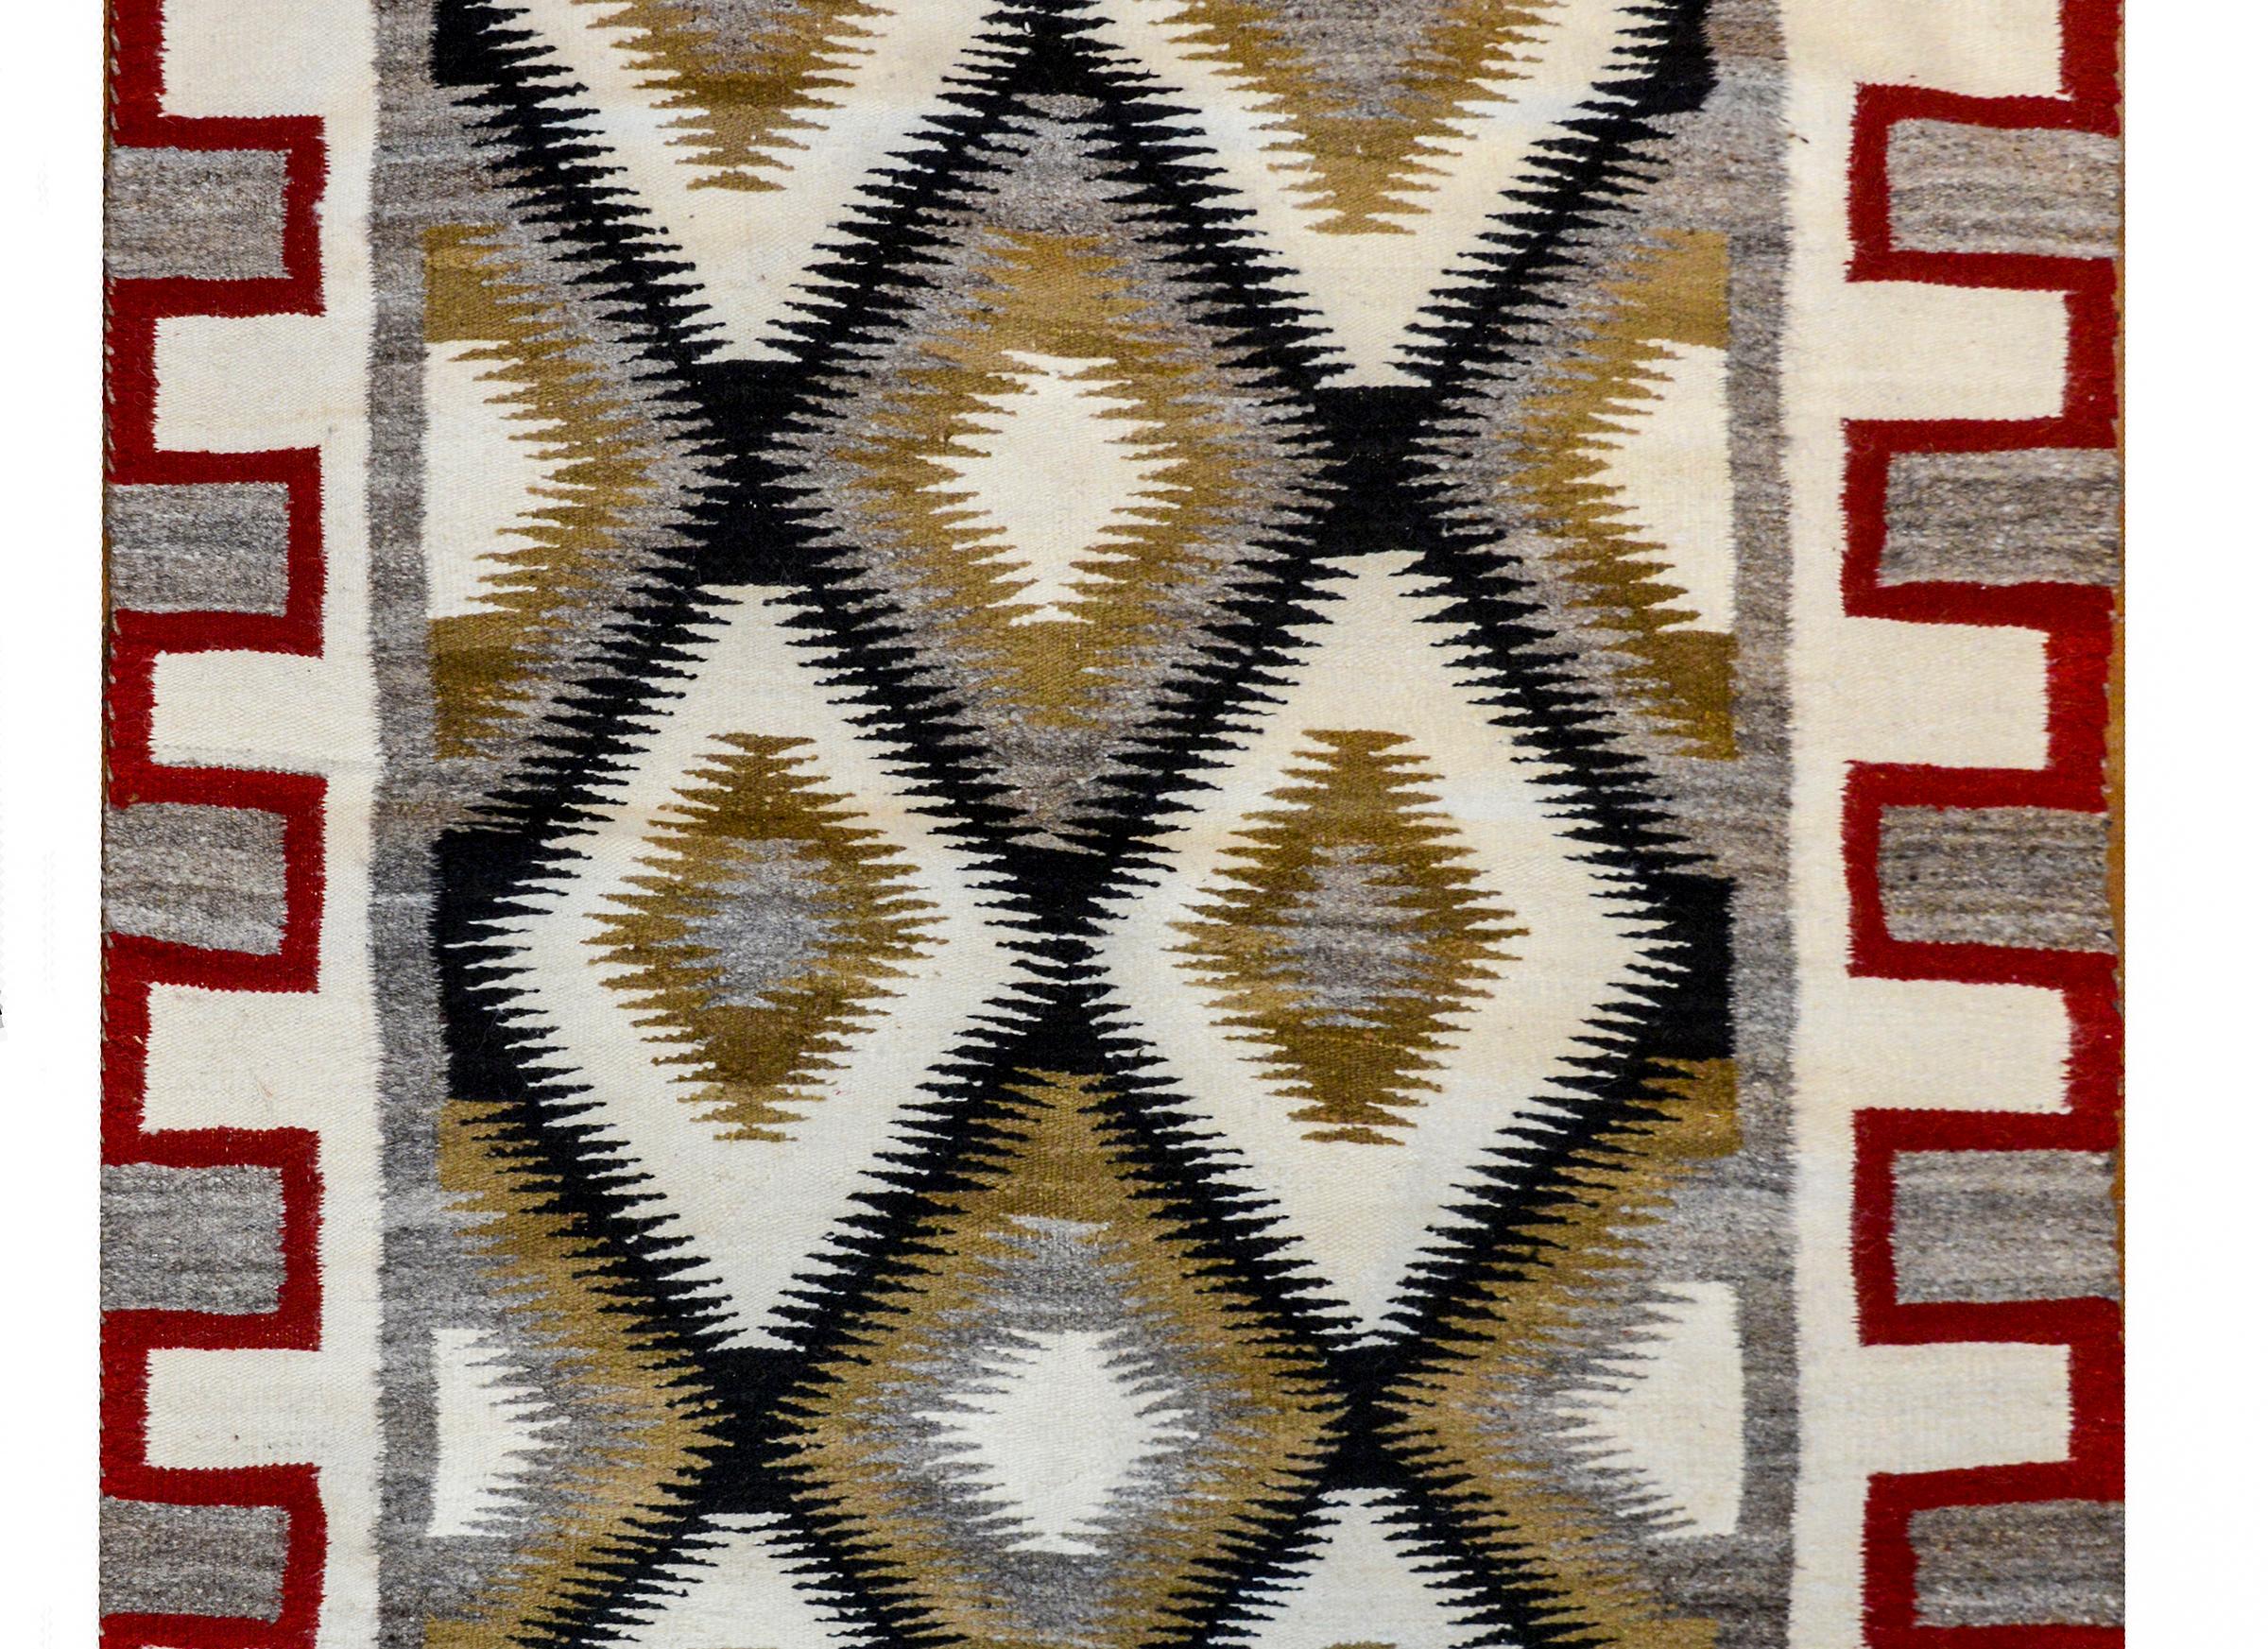 A bold mid-20th century Navajo rug with an all-over diamond pattern woven in black, white, and brown wool surrounded by a wide crimson, white, and gray stepped border.